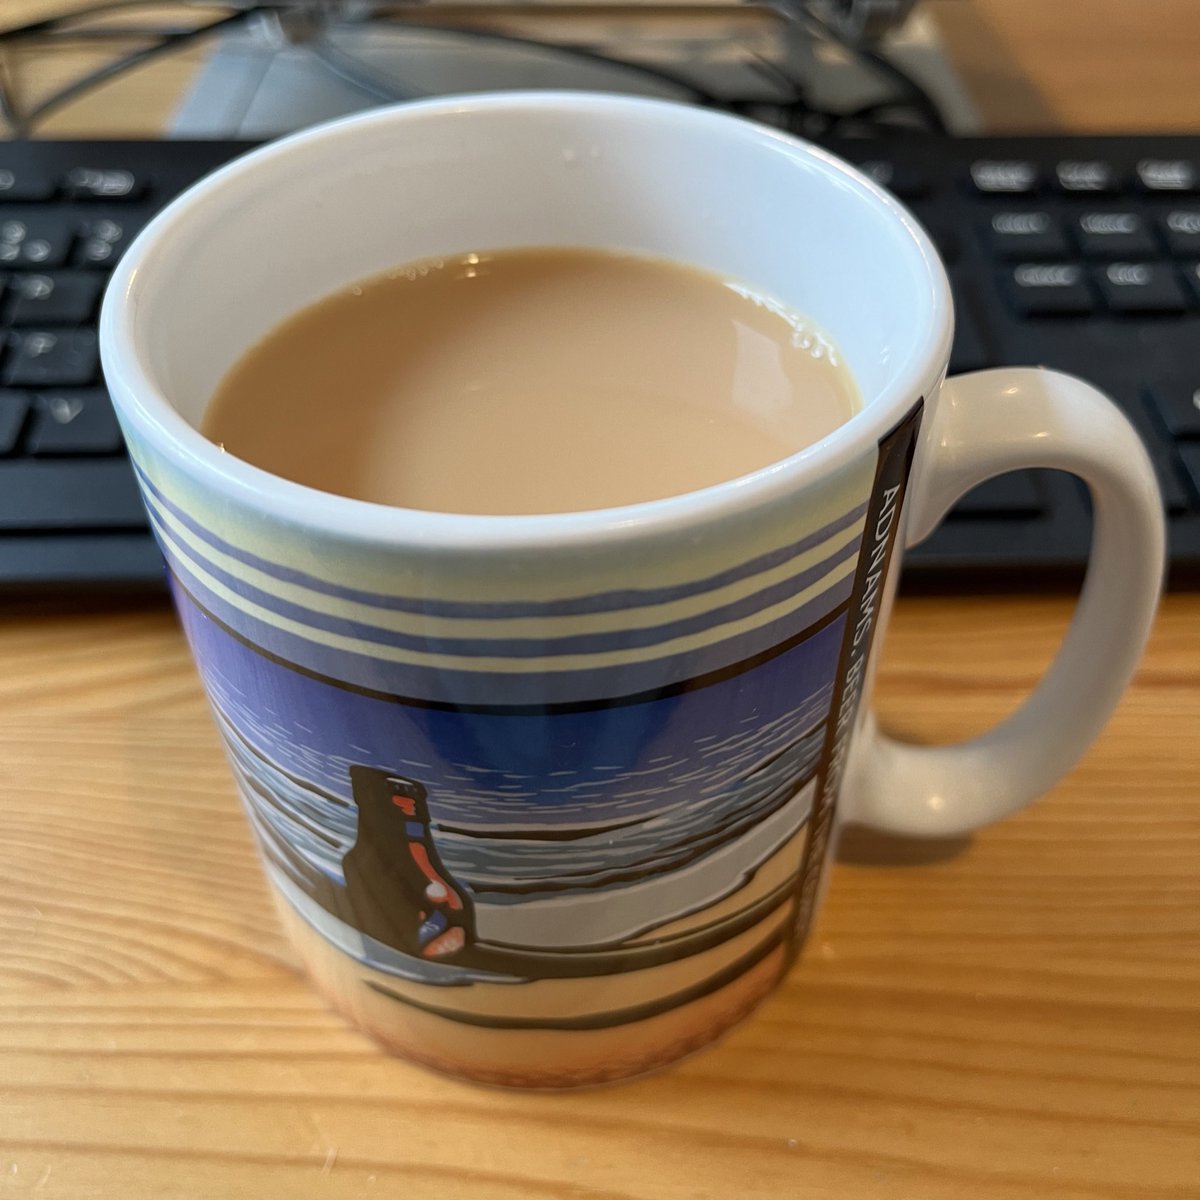 A bit surreal to be back to work today, albeit on a part-time basis, after a year of mat leave! Looking forward to getting stuck in (and to cups of tea whenever I like!) and fortunate that @natlibscot is an accommodating employer #childcarecrisis